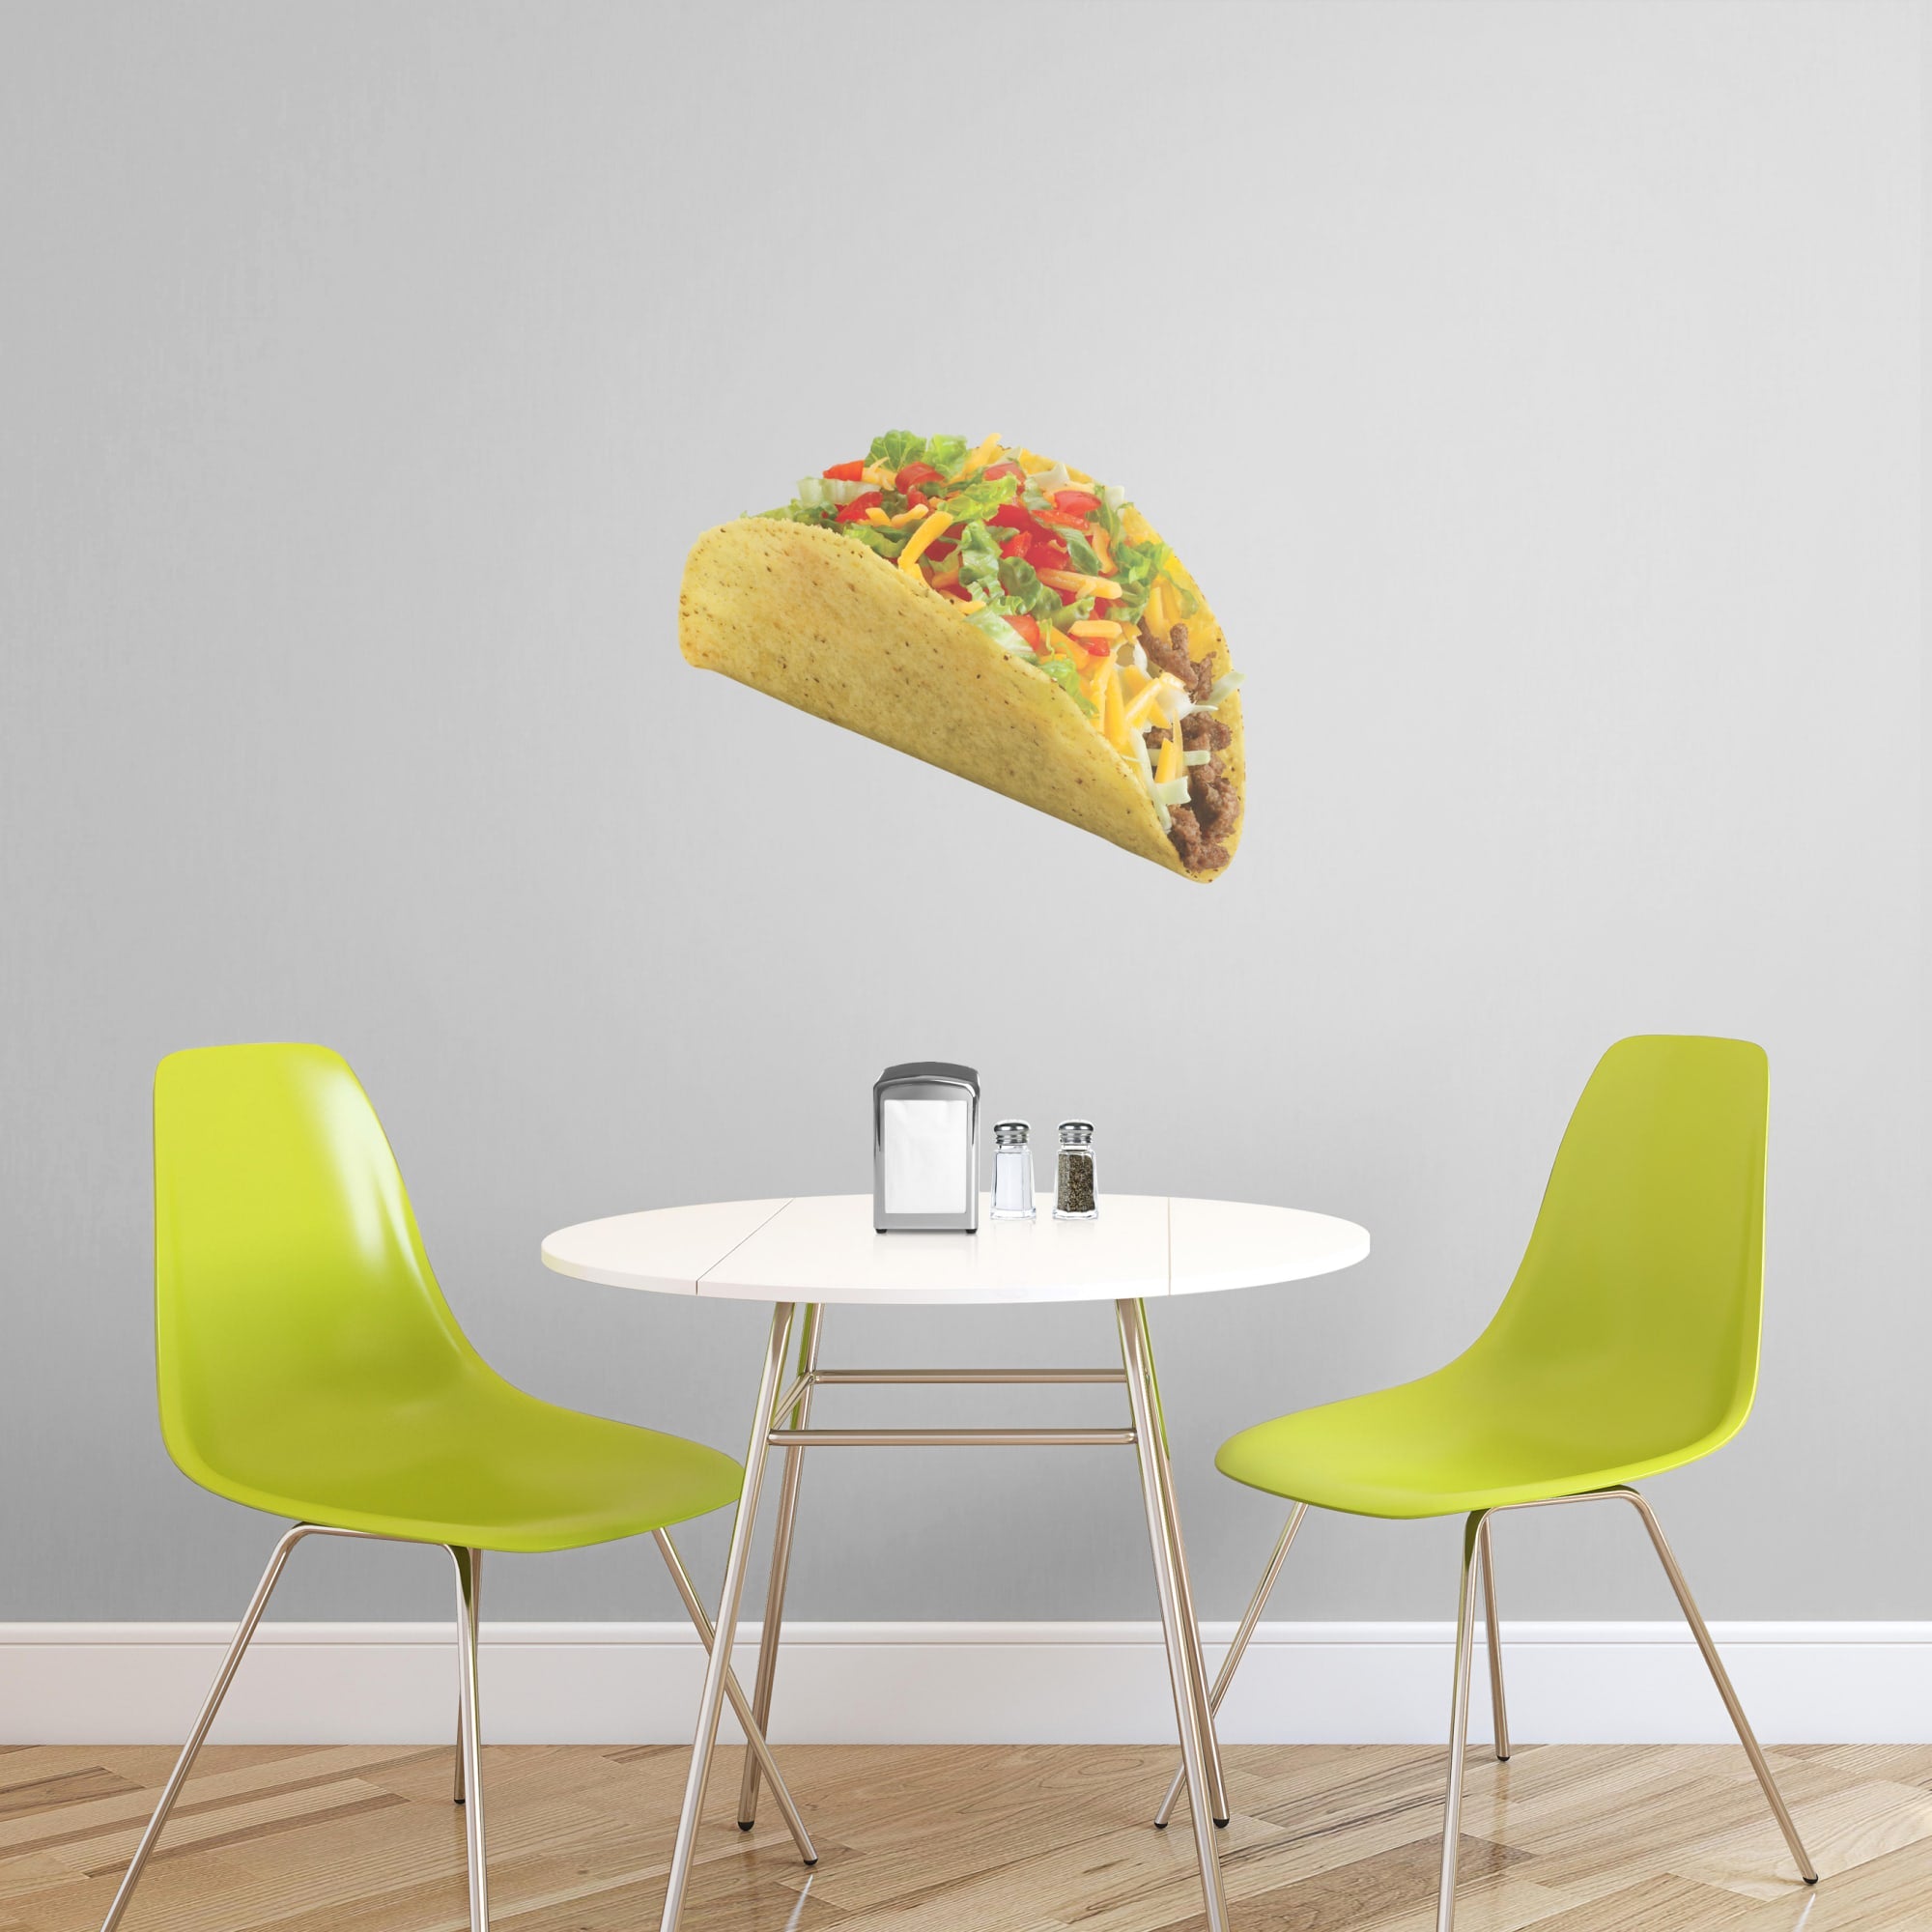 Taco - Removable Vinyl Decal XL by Fathead